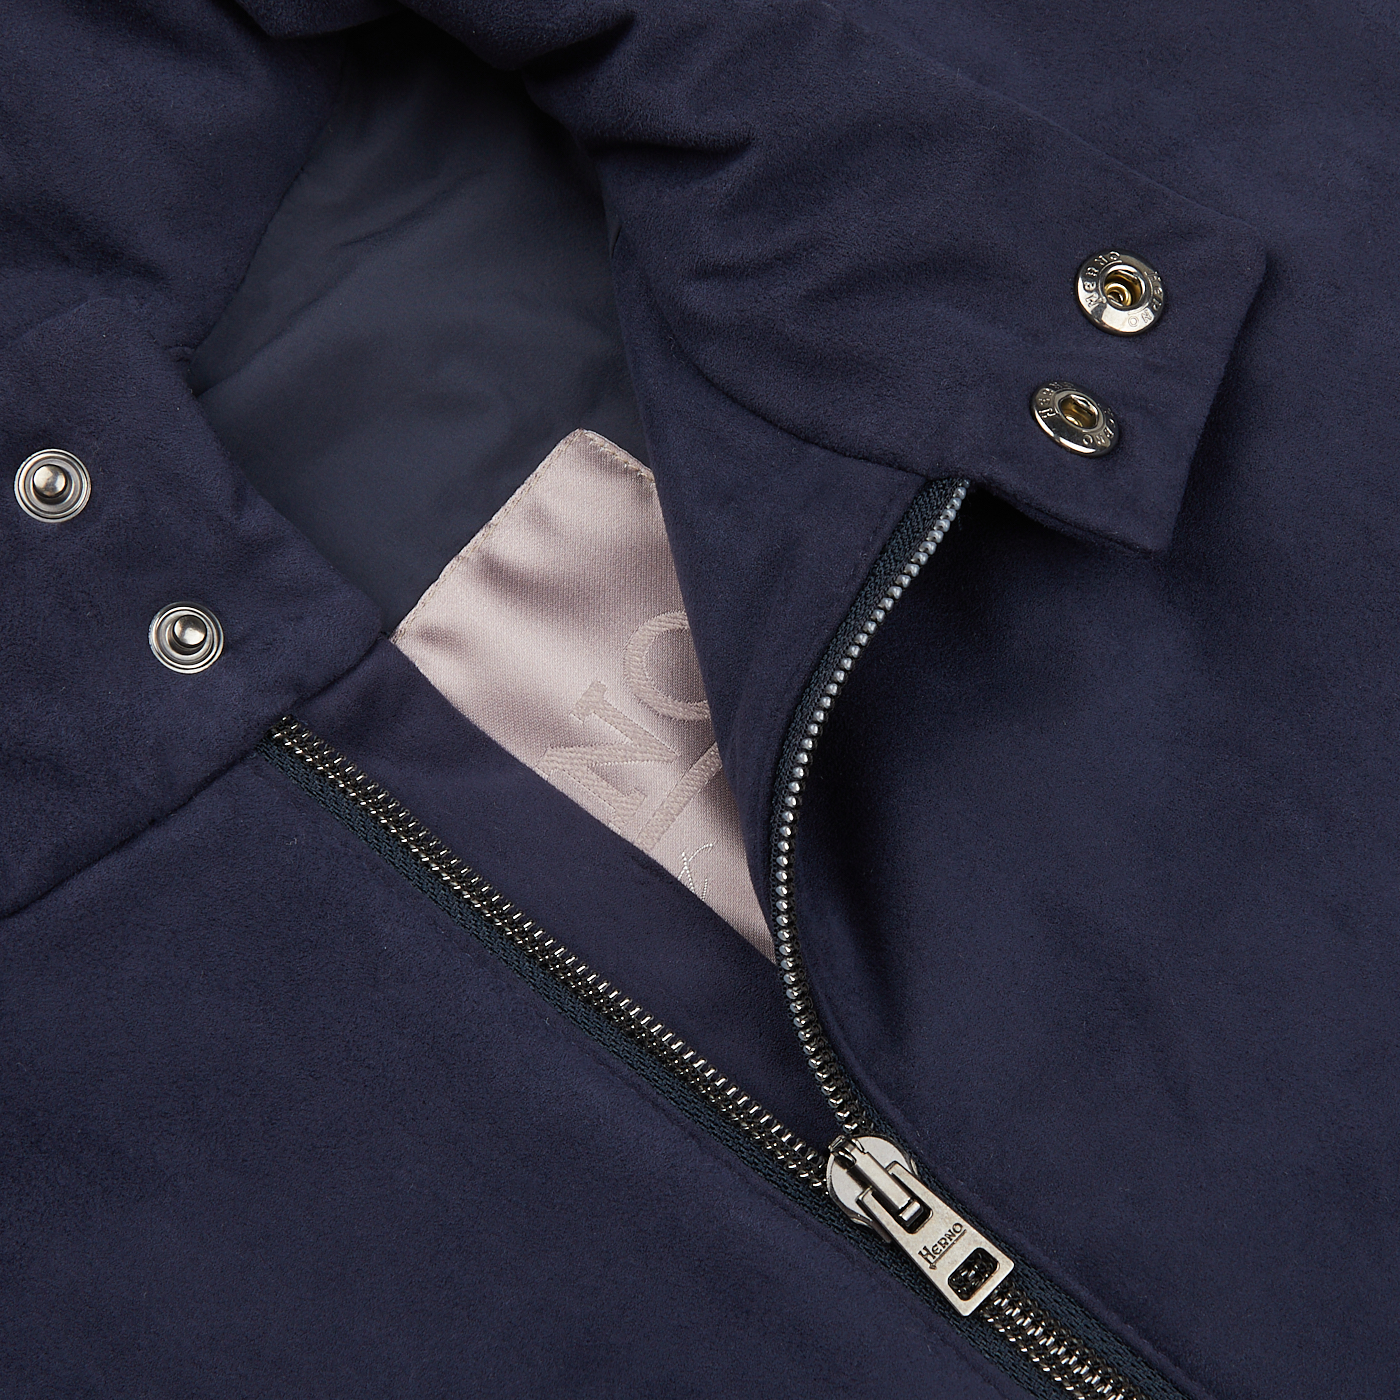 Close-up of a Herno navy blue suede Alcantara Zip Gilet showing a partially unzipped zipper, metal snap buttons, and an interior tag.